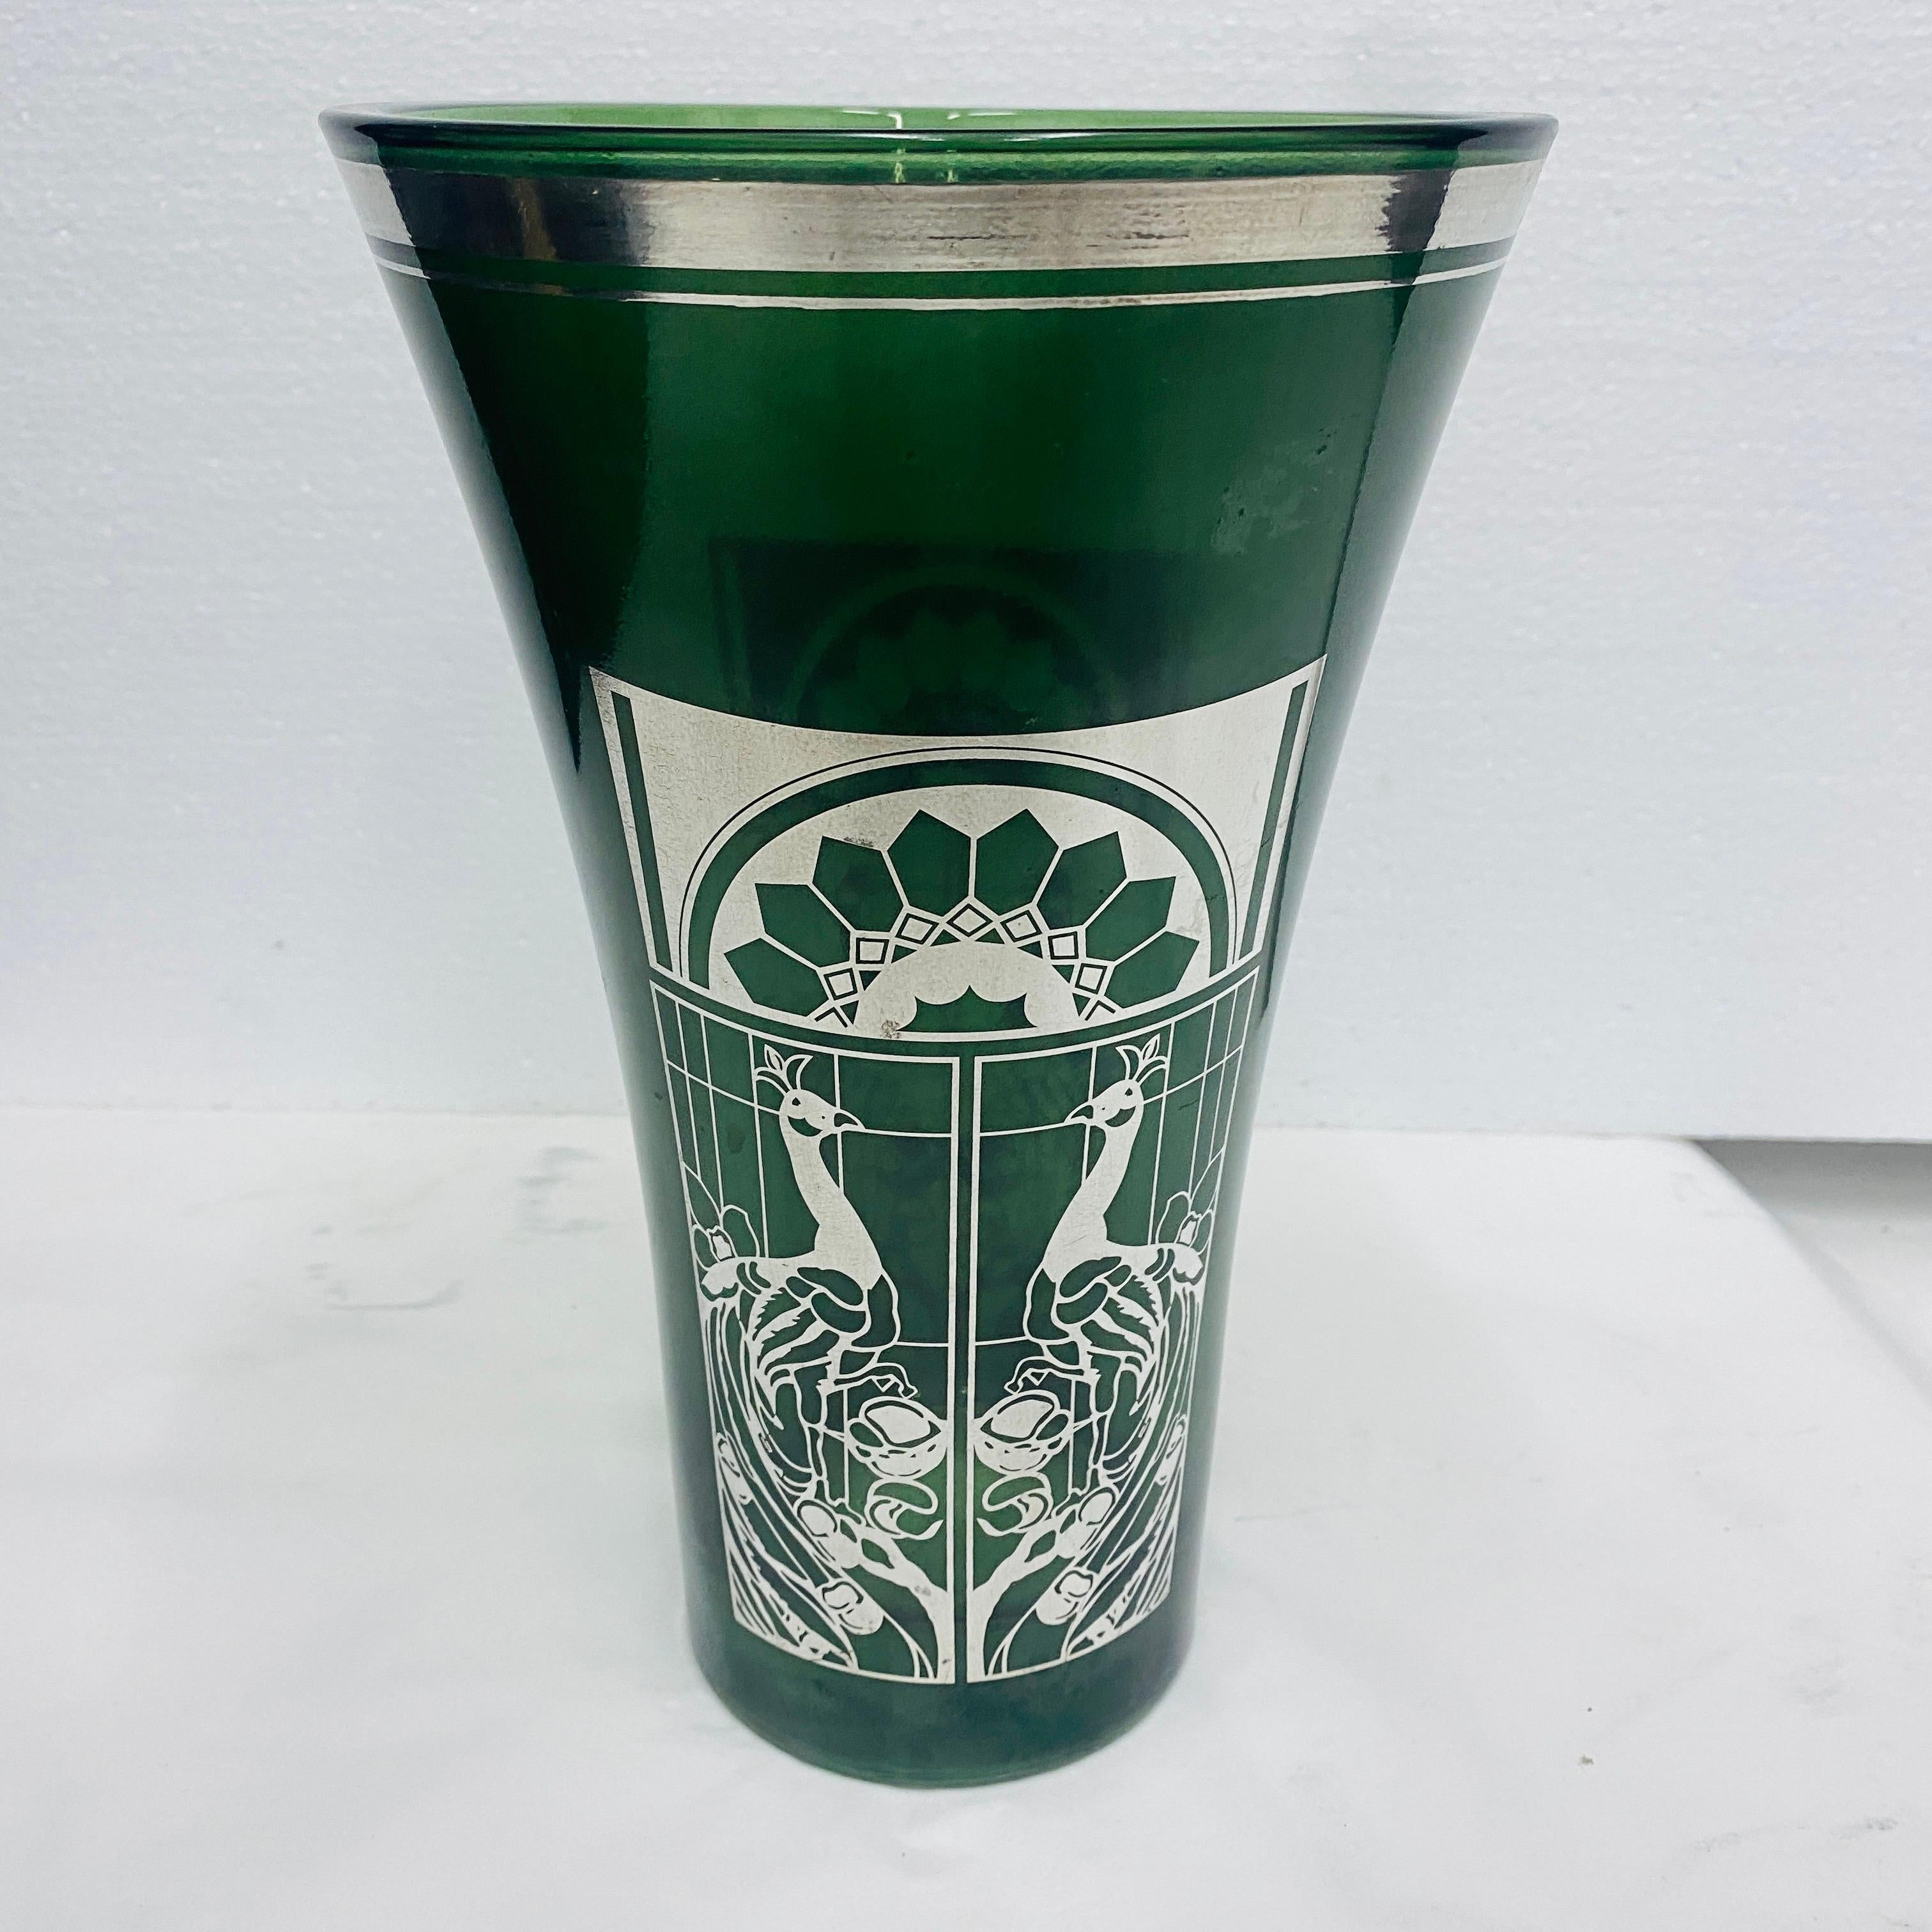 This Italian vase from the early 1900s marries the elegance of green glass with the sophistication of silver detailing. The vase exudes the organic forms and intricate ornamentation characteristic of the Art Nouveau movement, capturing the essence